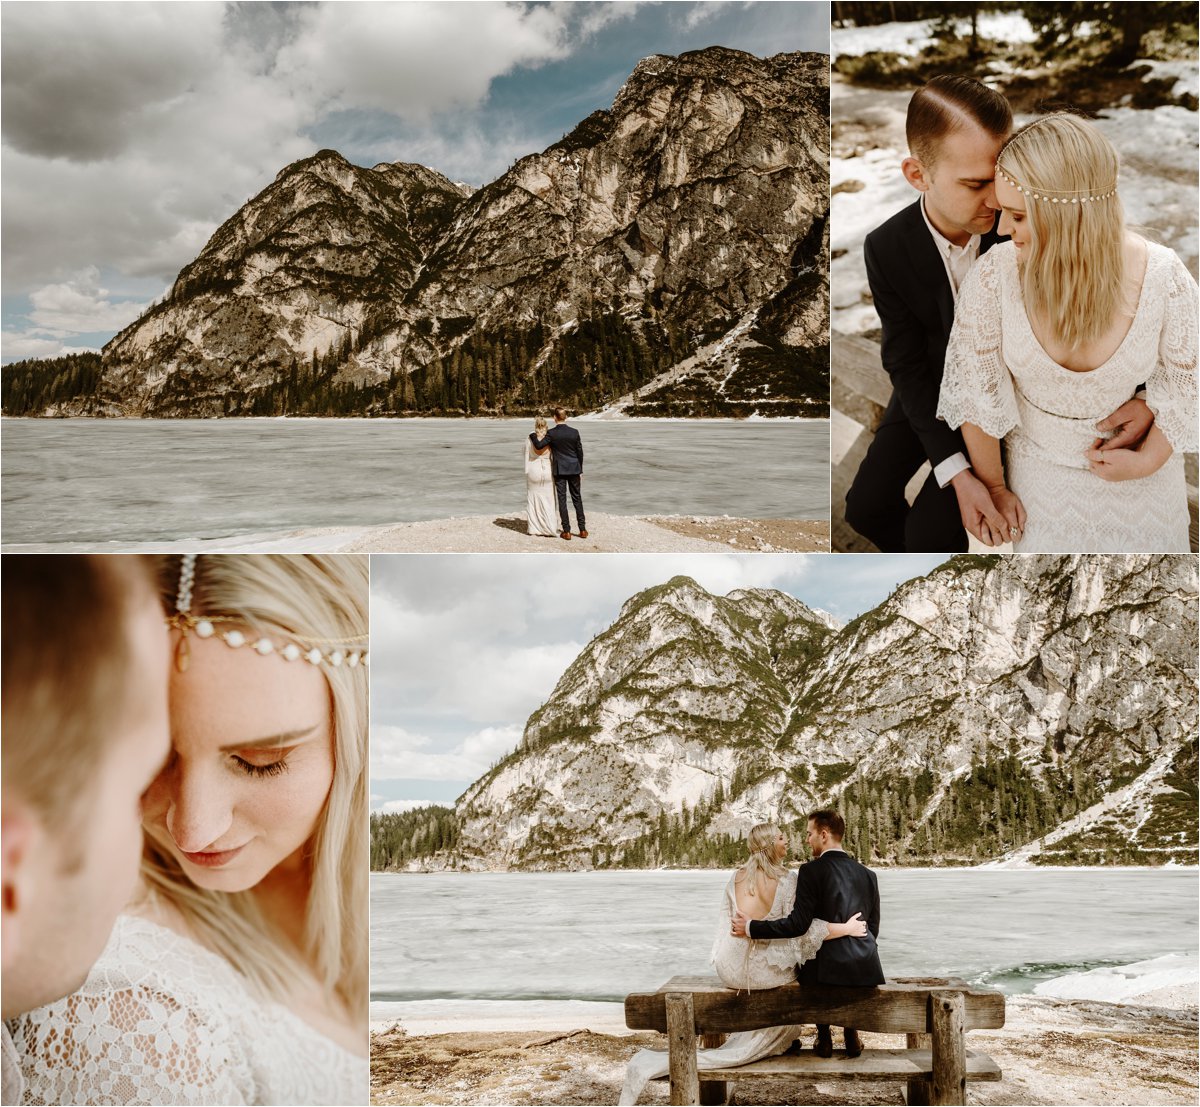 Erika & Nathan have a peaceful moment on a wooden bench on the edge of Lake Prags in the Dolomites. Photos by Wild Connections Photography